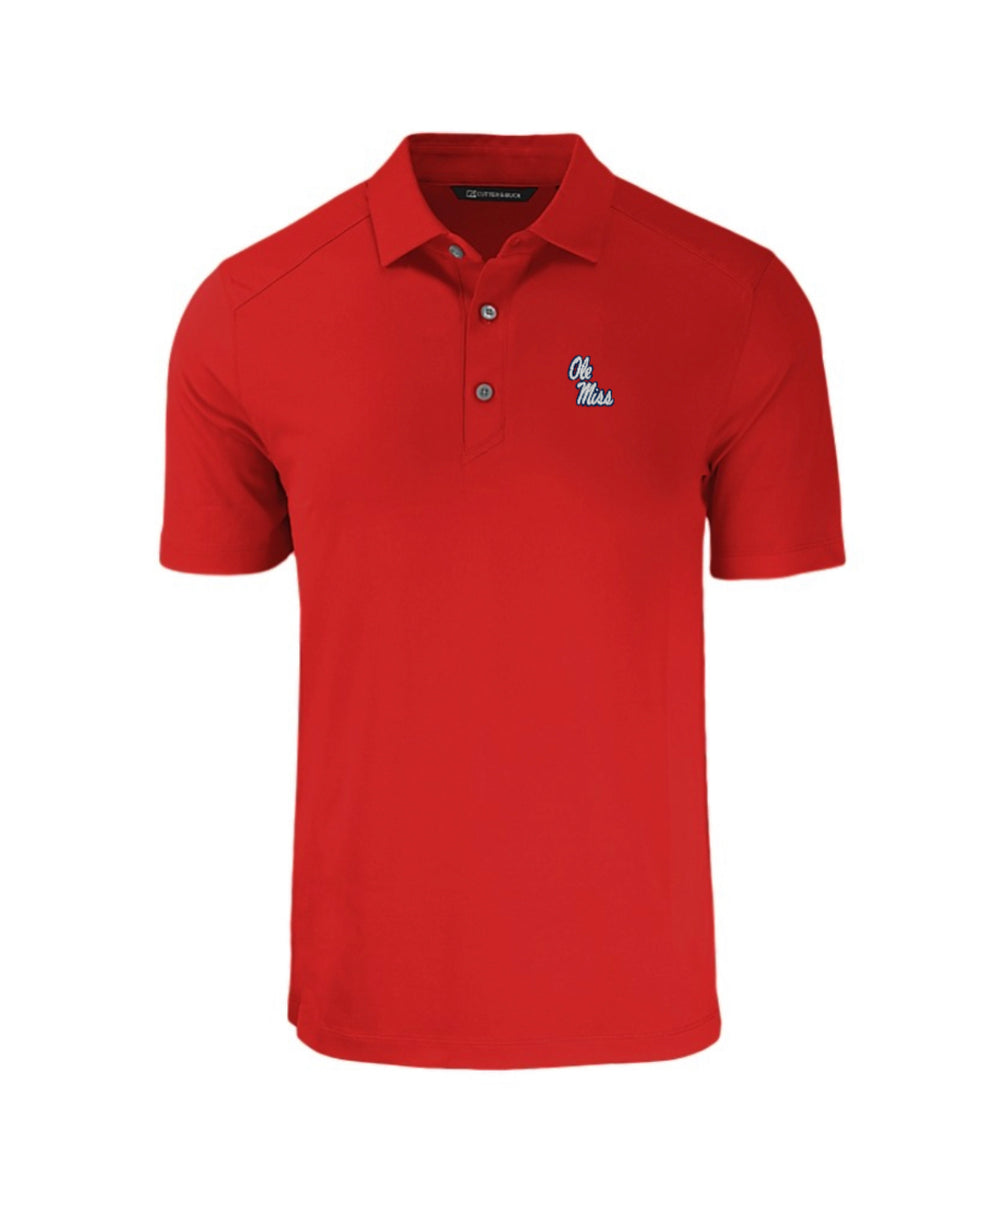 Cutter & Buck forge eco recycled polo